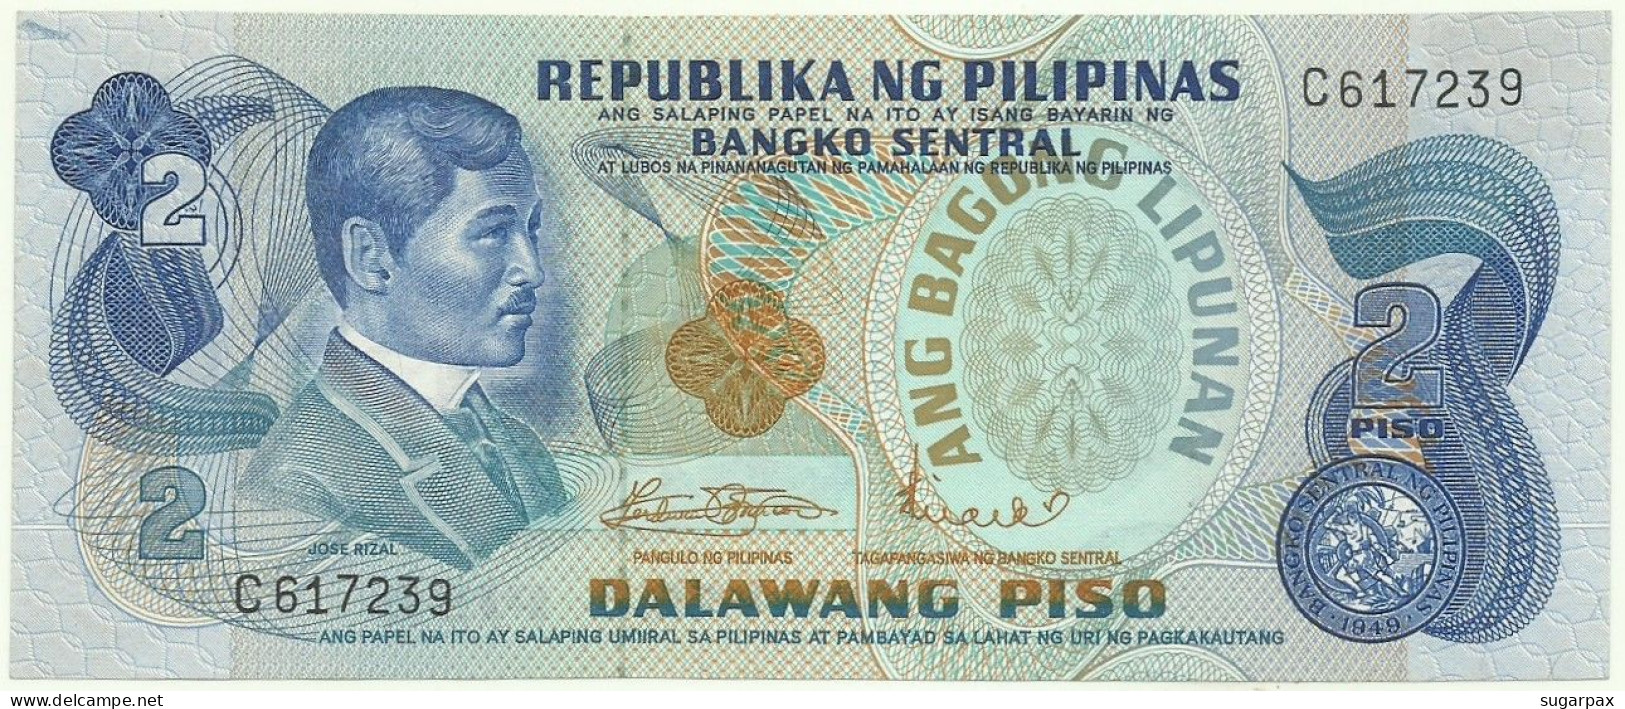 Philippines - 2 Piso - ND ( 1970s ) - Pick 152 - Unc. - Sign. 8 - Serie C - ANG BAGONG LIPUNAN ( 1974 - 1985 ) - Philippines